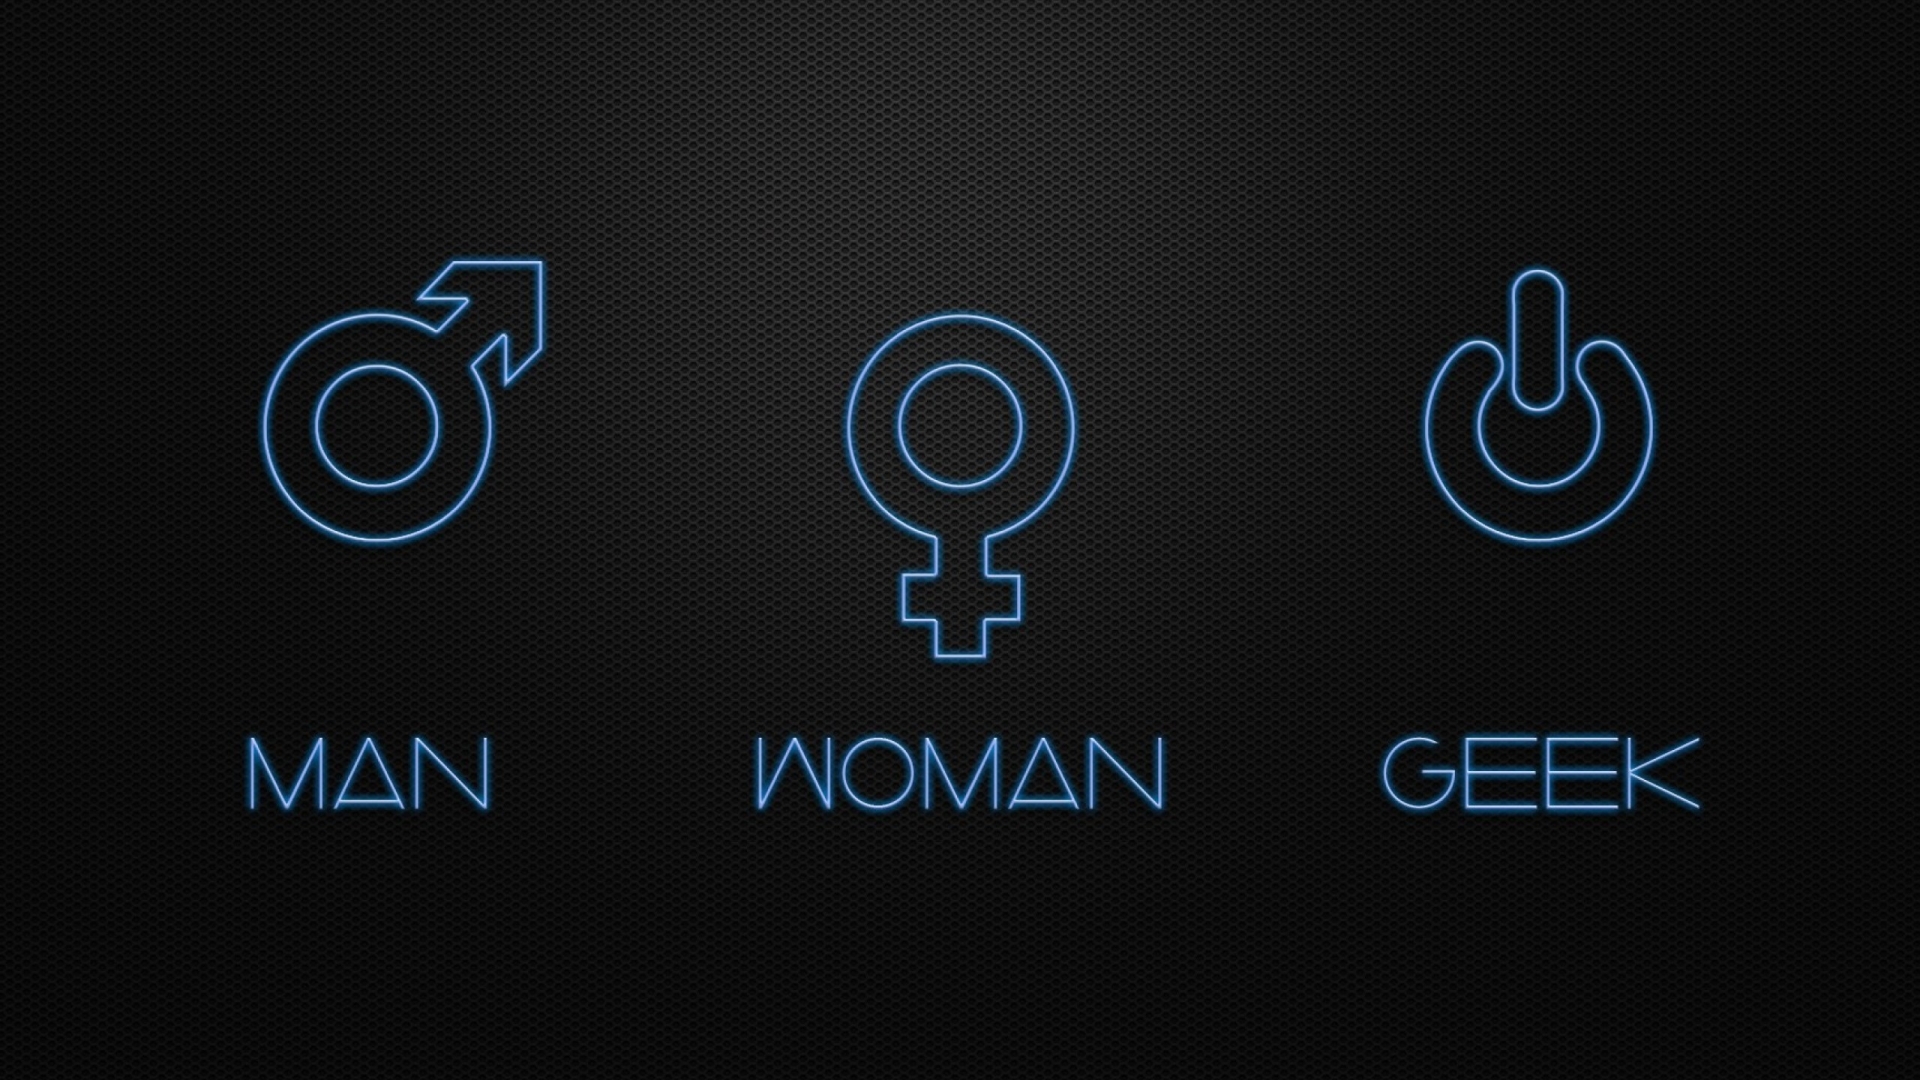 Man Woman and Geek for 1920 x 1080 HDTV 1080p resolution